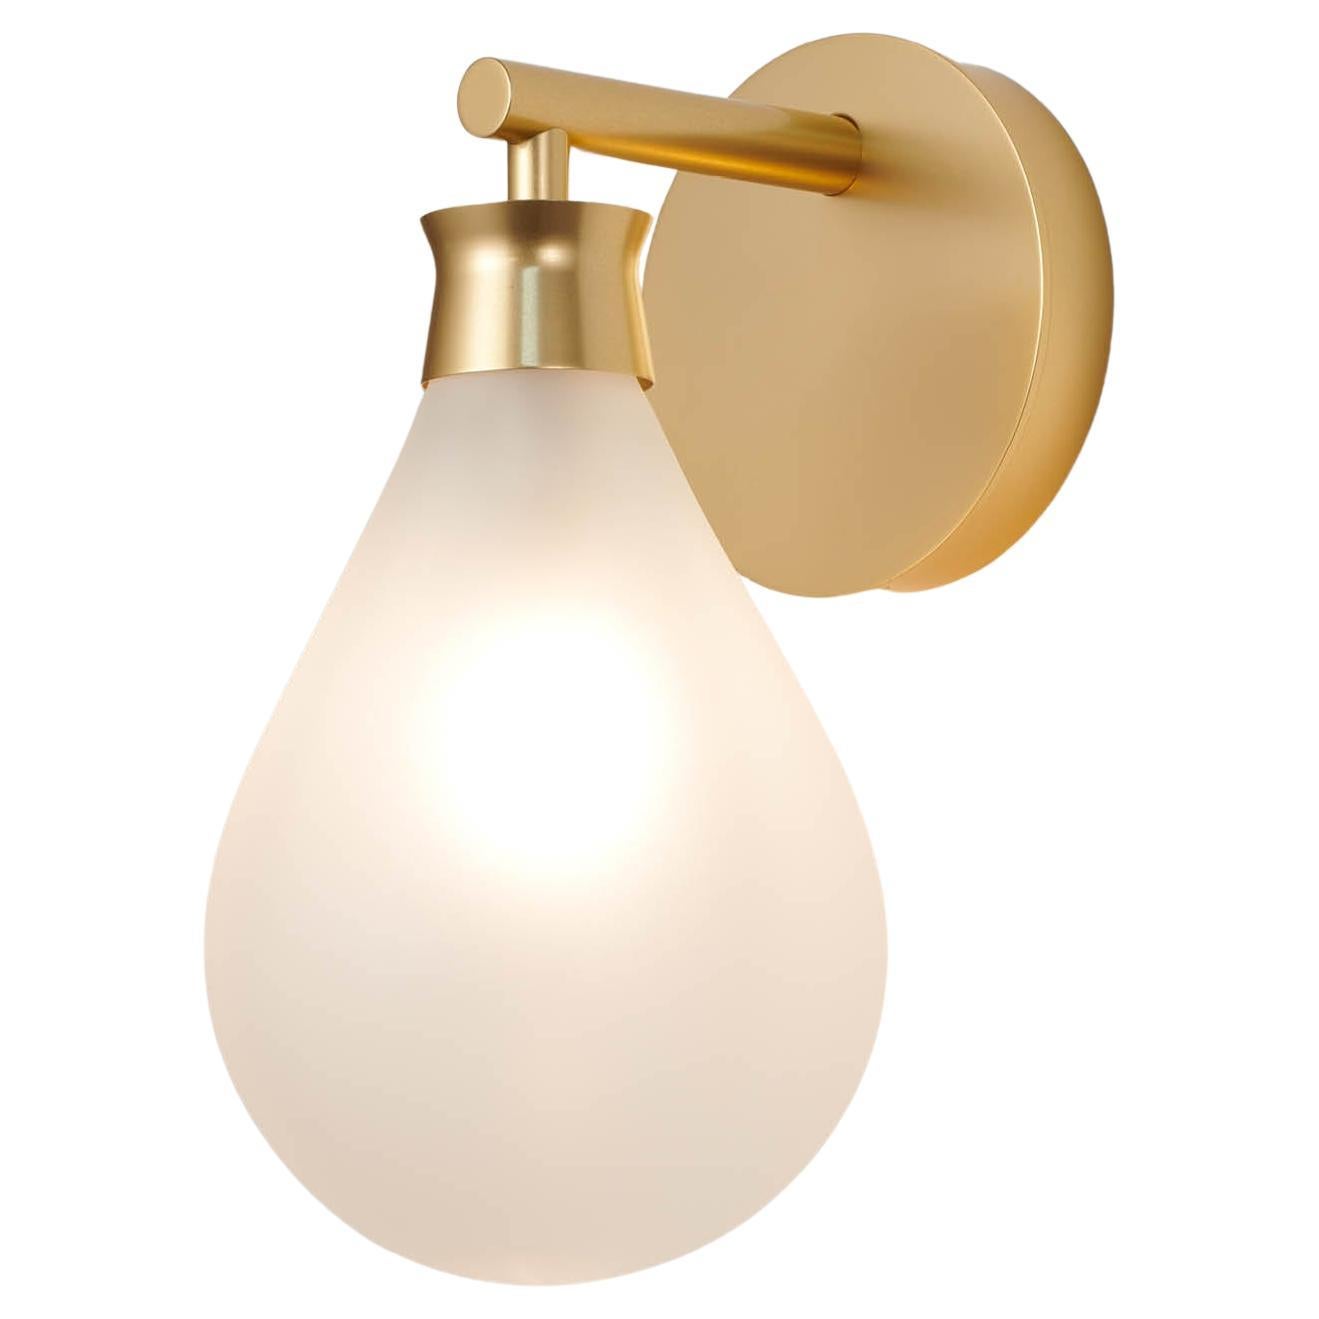 Cintola Wall Light in Satin Gold with Frosted Handblown Glass Globe For Sale